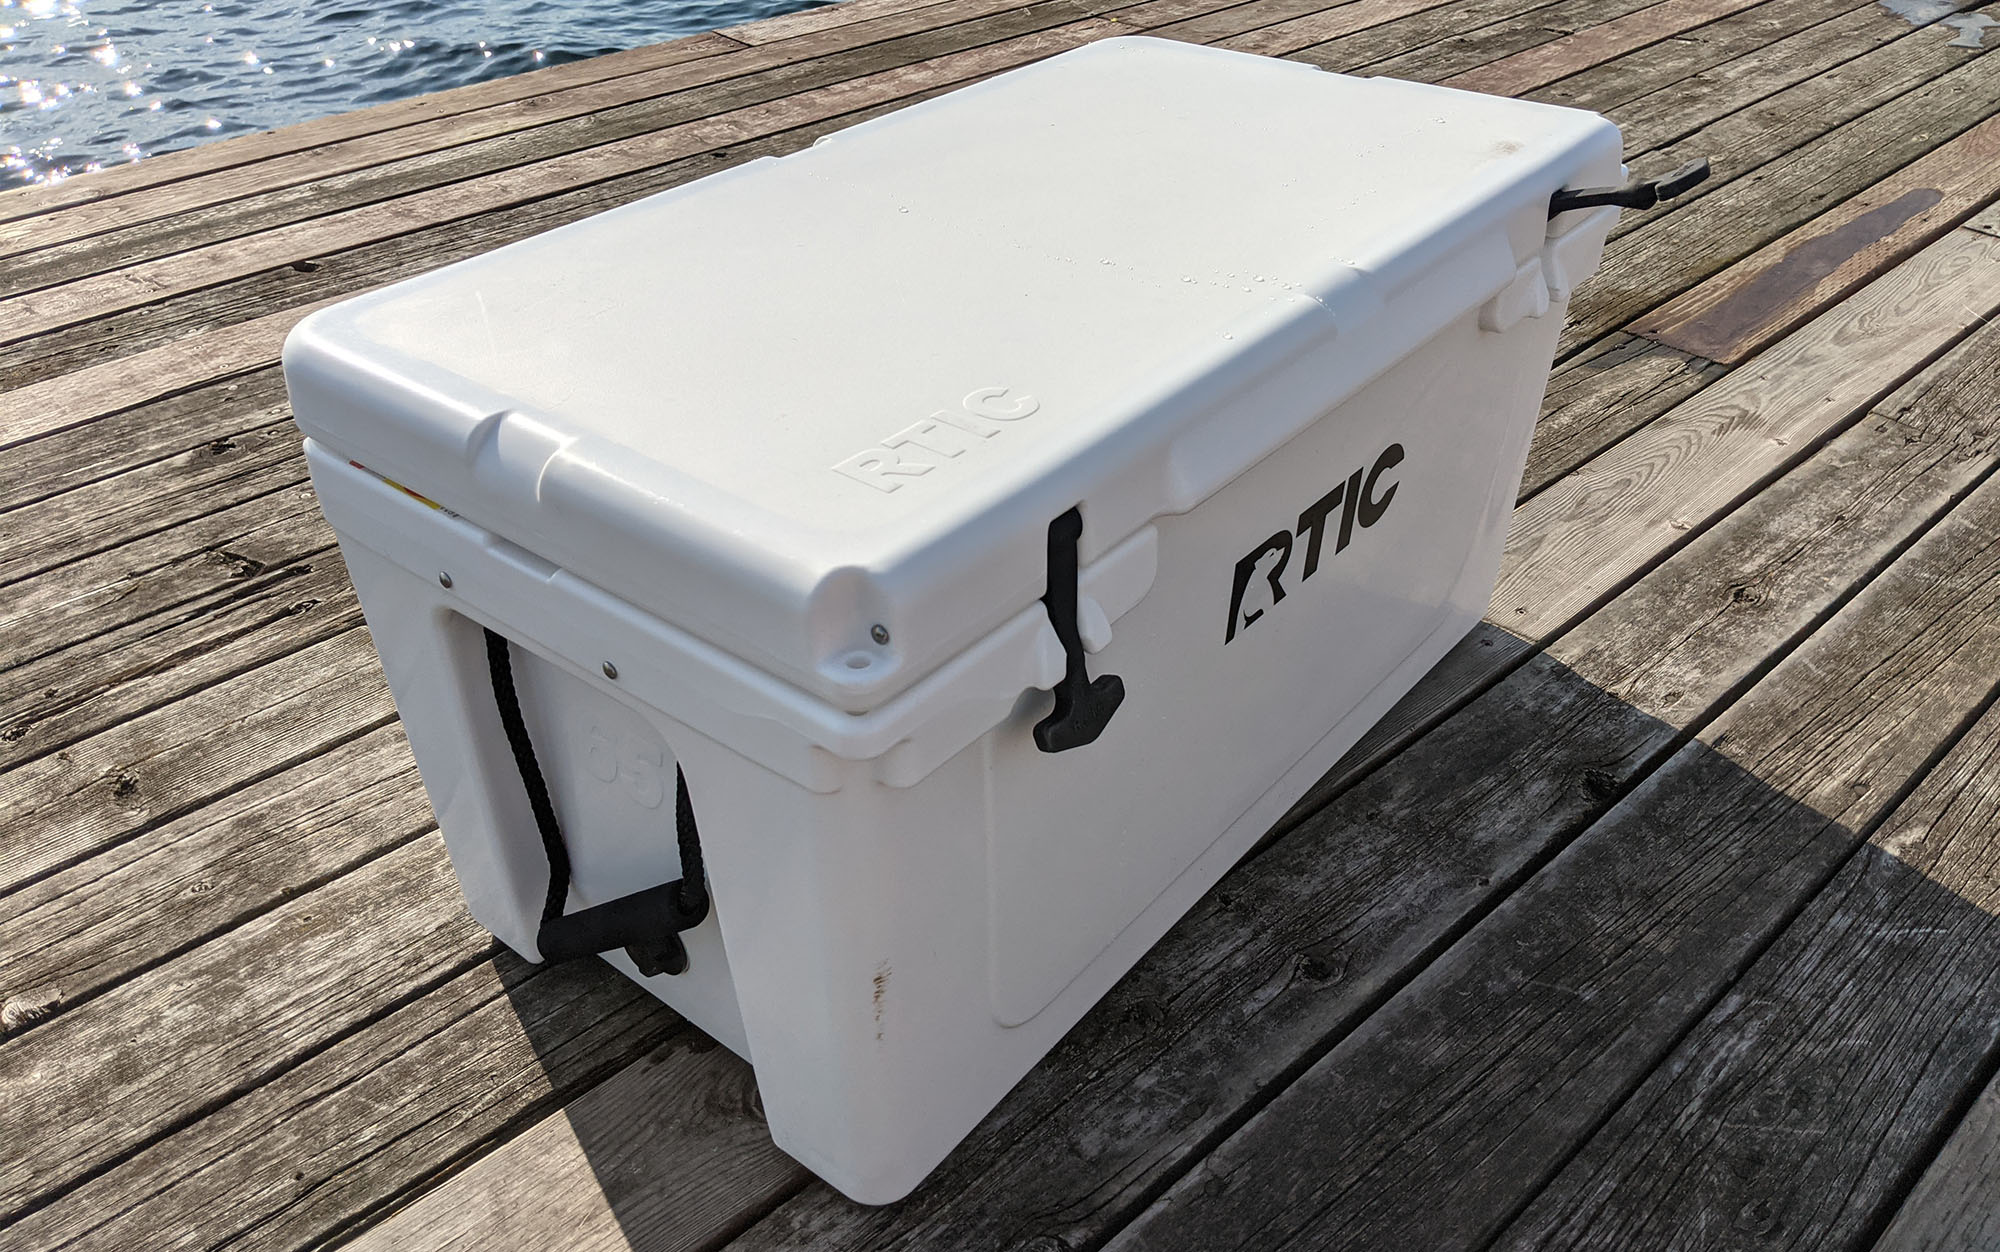 RTIC cooler sitting on a dock.